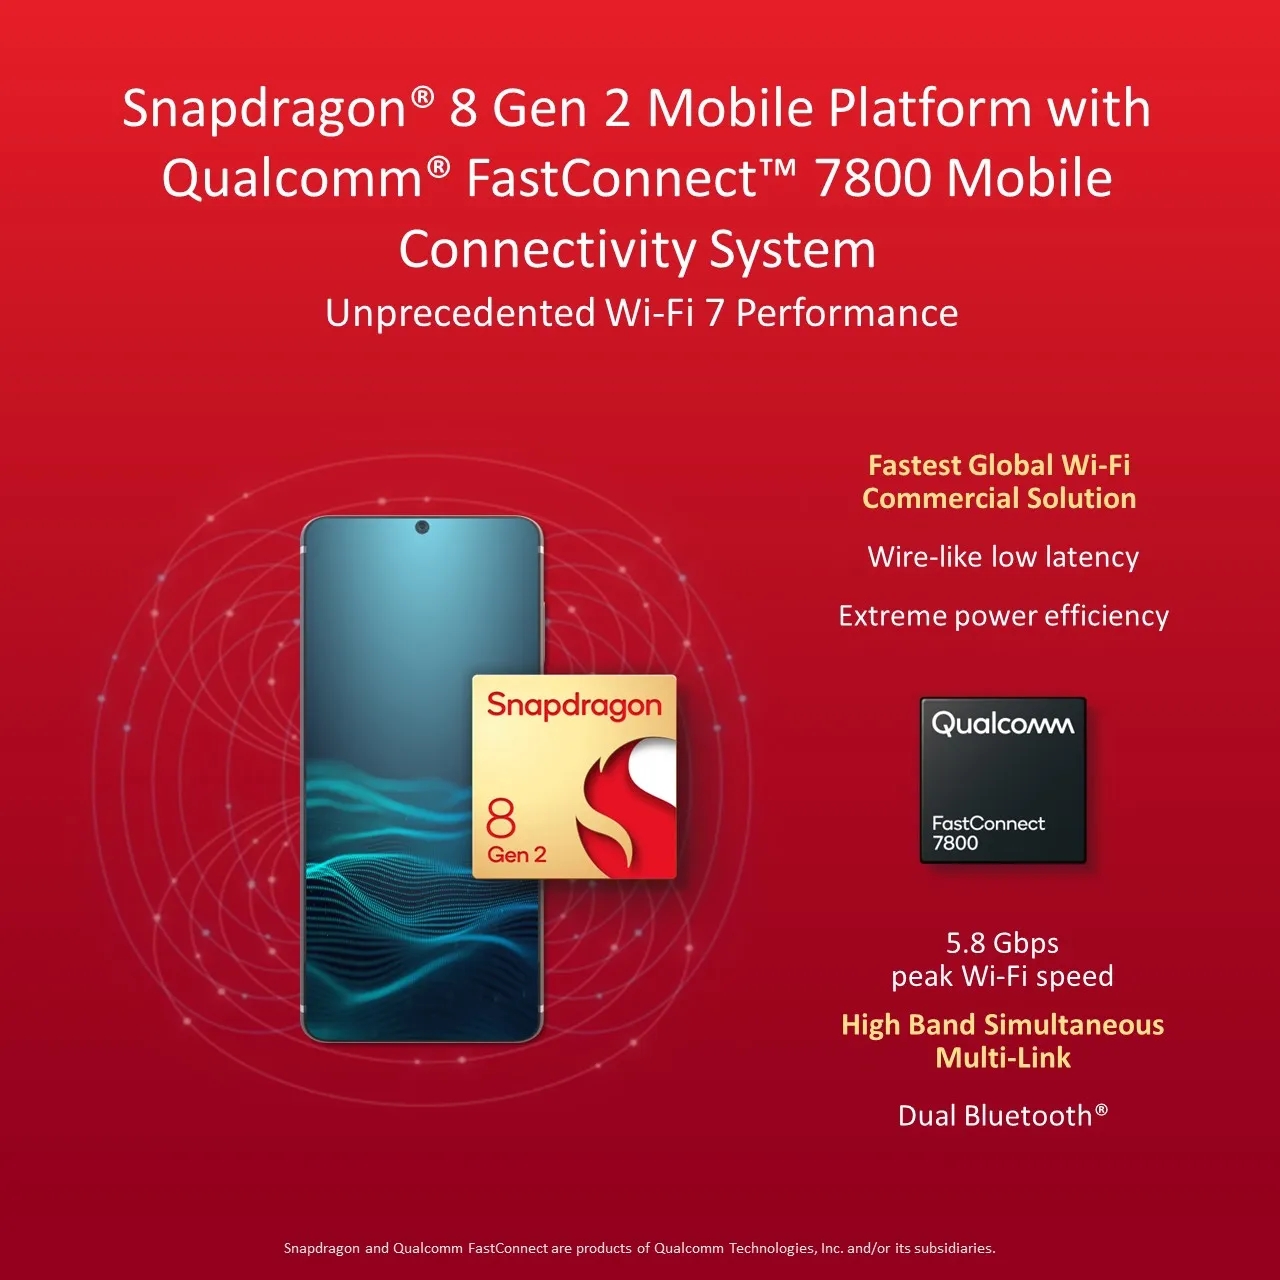 Image showing Snapdragon Gen 2 chip and features